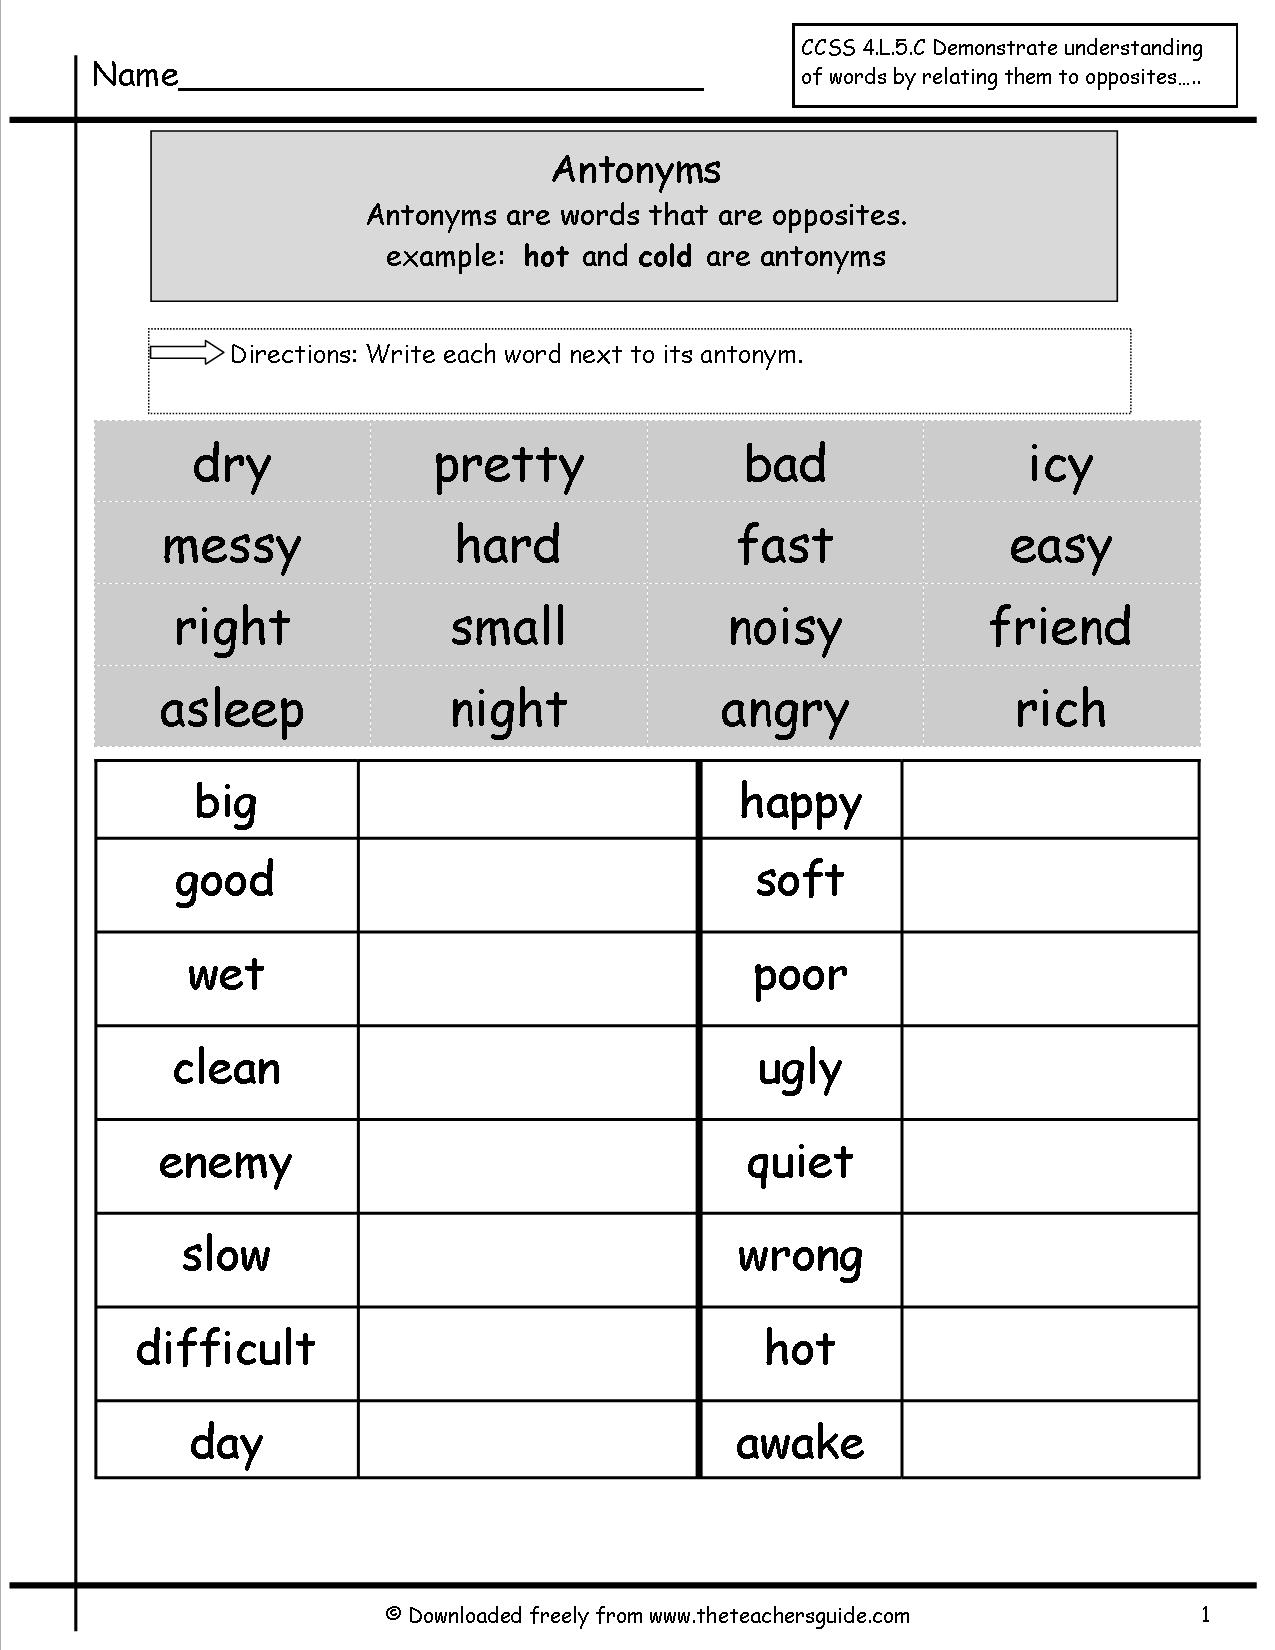 19-best-images-of-1st-grade-grammar-worksheets-nouns-and-verbs-free-noun-worksheets-first